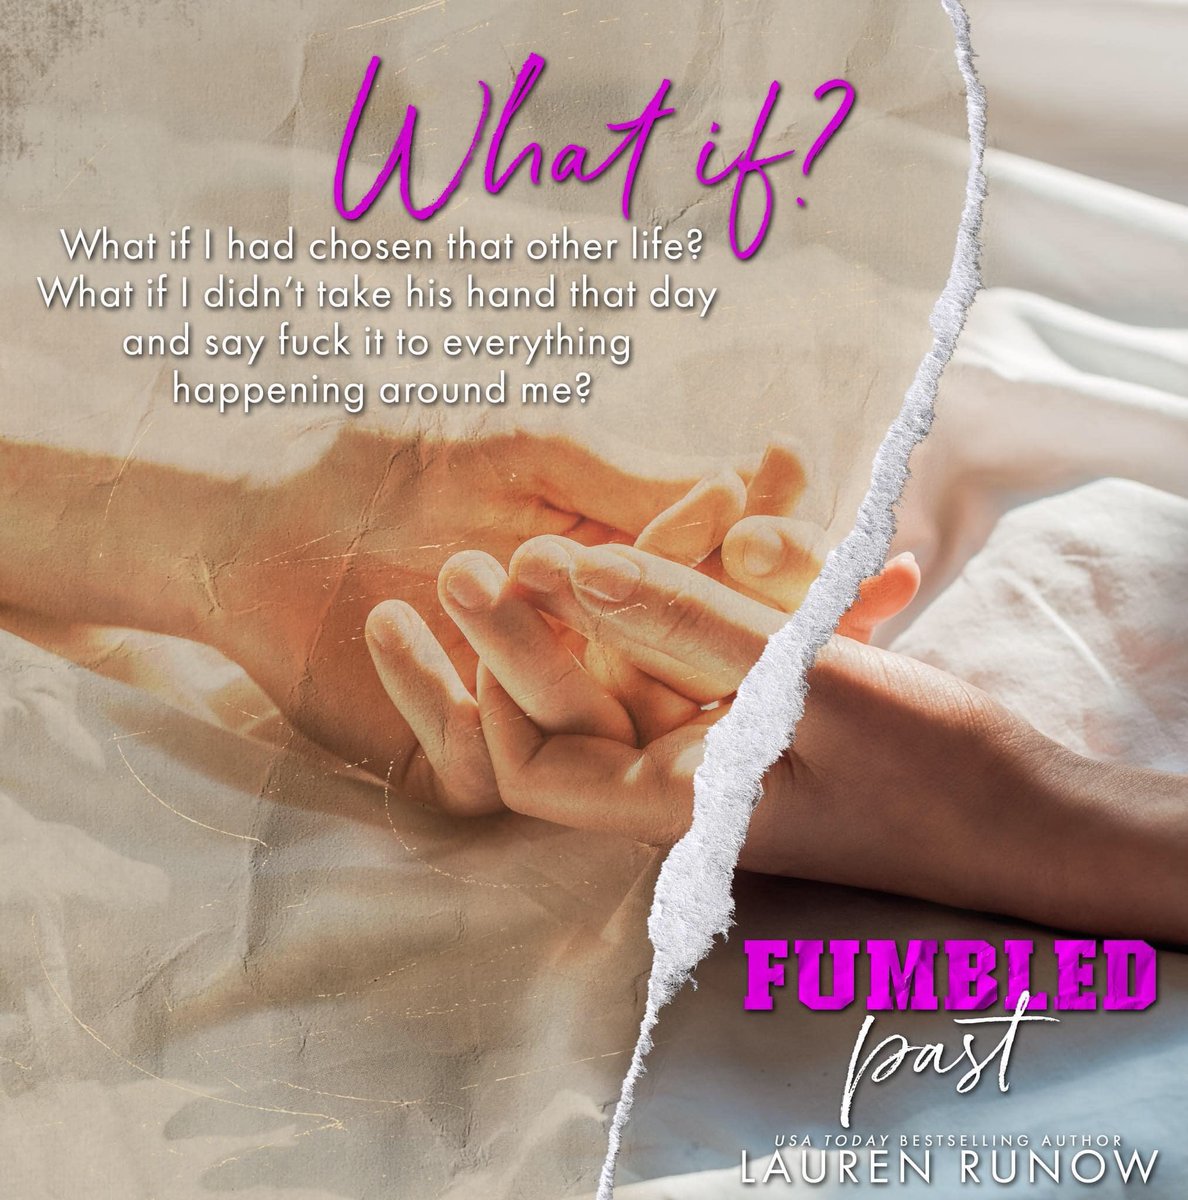 FUMBLED PAST by Lauren Runow is LIVE!! This is a small town, sports romance with all the feels! Grab your copy today! Read FREE with Kindle Unlimited! mybook.to/fumbledpast
Add to Goodreads: goodreads.com/book/show/7555…
#wordsmithpublicity